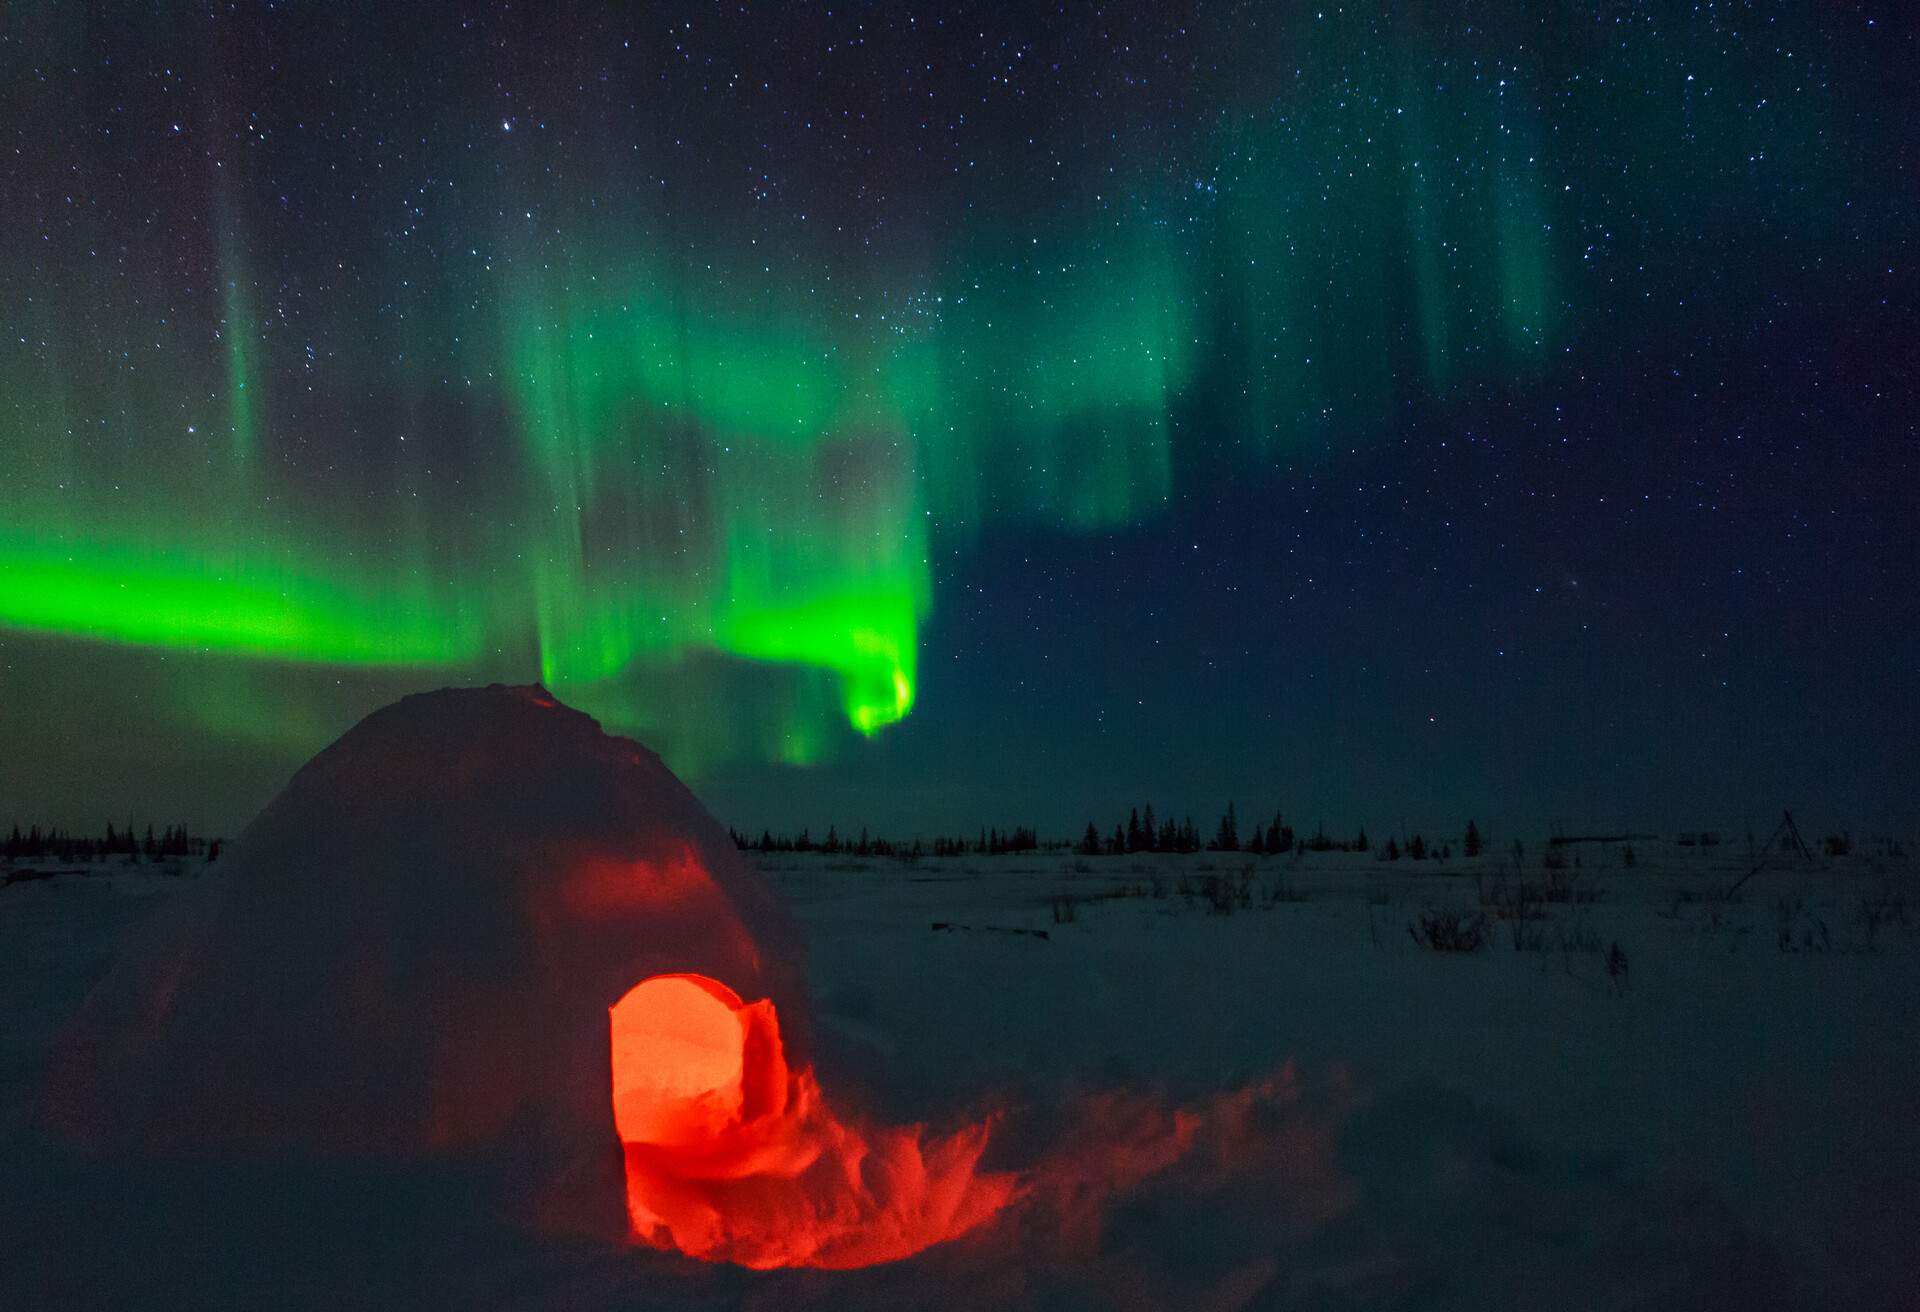 Curtain-like northern lights on a starry sky above the illuminated dome-shaped snow structure.